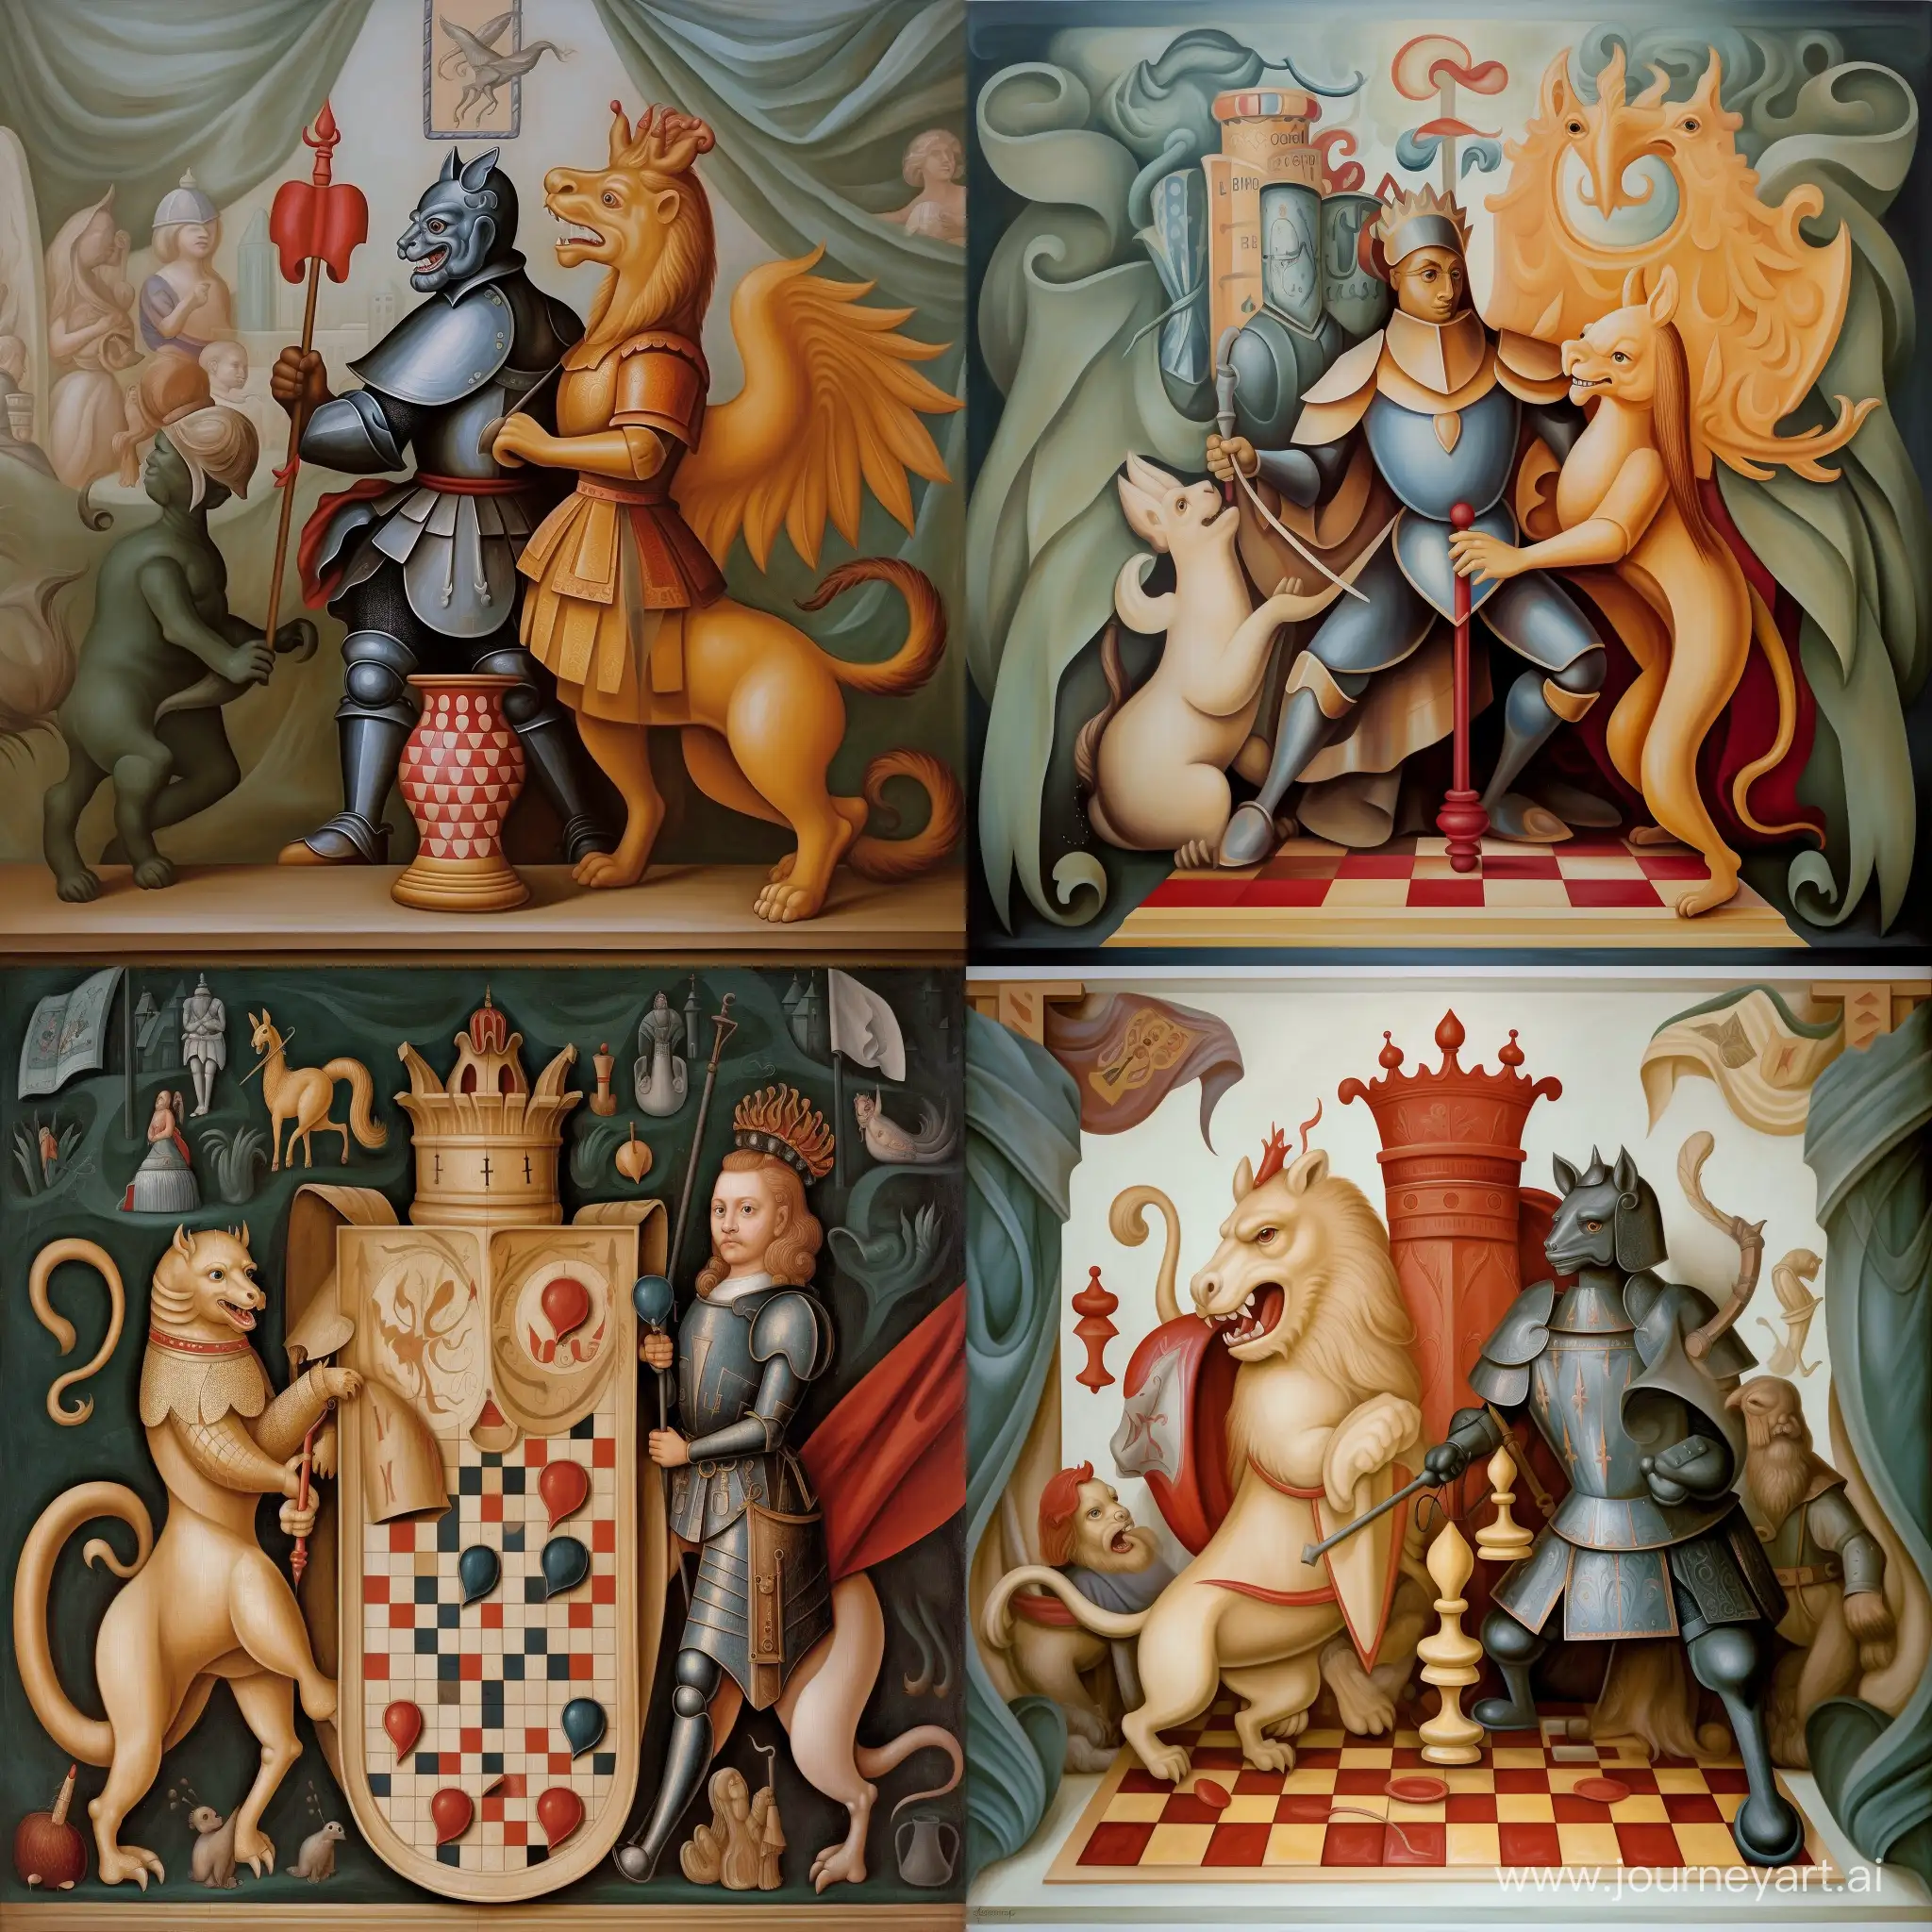 depict the clash between innovation and traditionalism in a symbolic painting from the reneissance. The innovation is represented by a knight, on its shoulder sits an owl, on its shield a lion is depicted. The traditionalism is represented by a dragon, it is pale and old and it is sitting on a pile of money. In the backtround there is a child playing with toys, a camel. Behind the knight there are young people, full of hope and energy. Behind the dragon there are old academics, dressed in black. In the sky there is a snake biting its own tail.